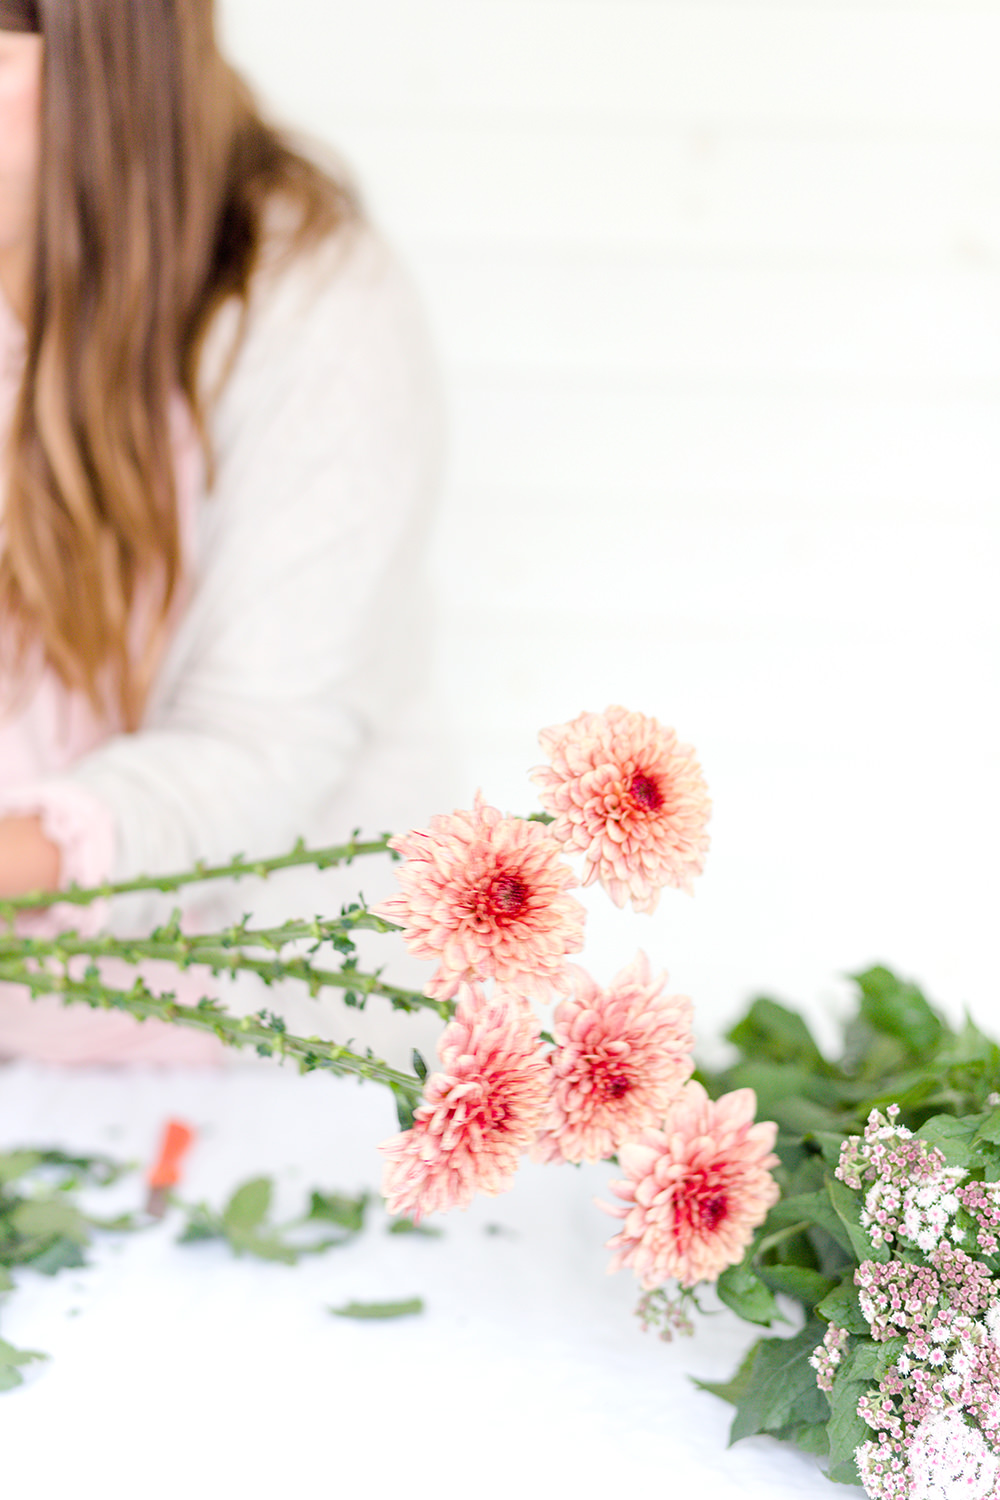 Career change profile | How to become a florist